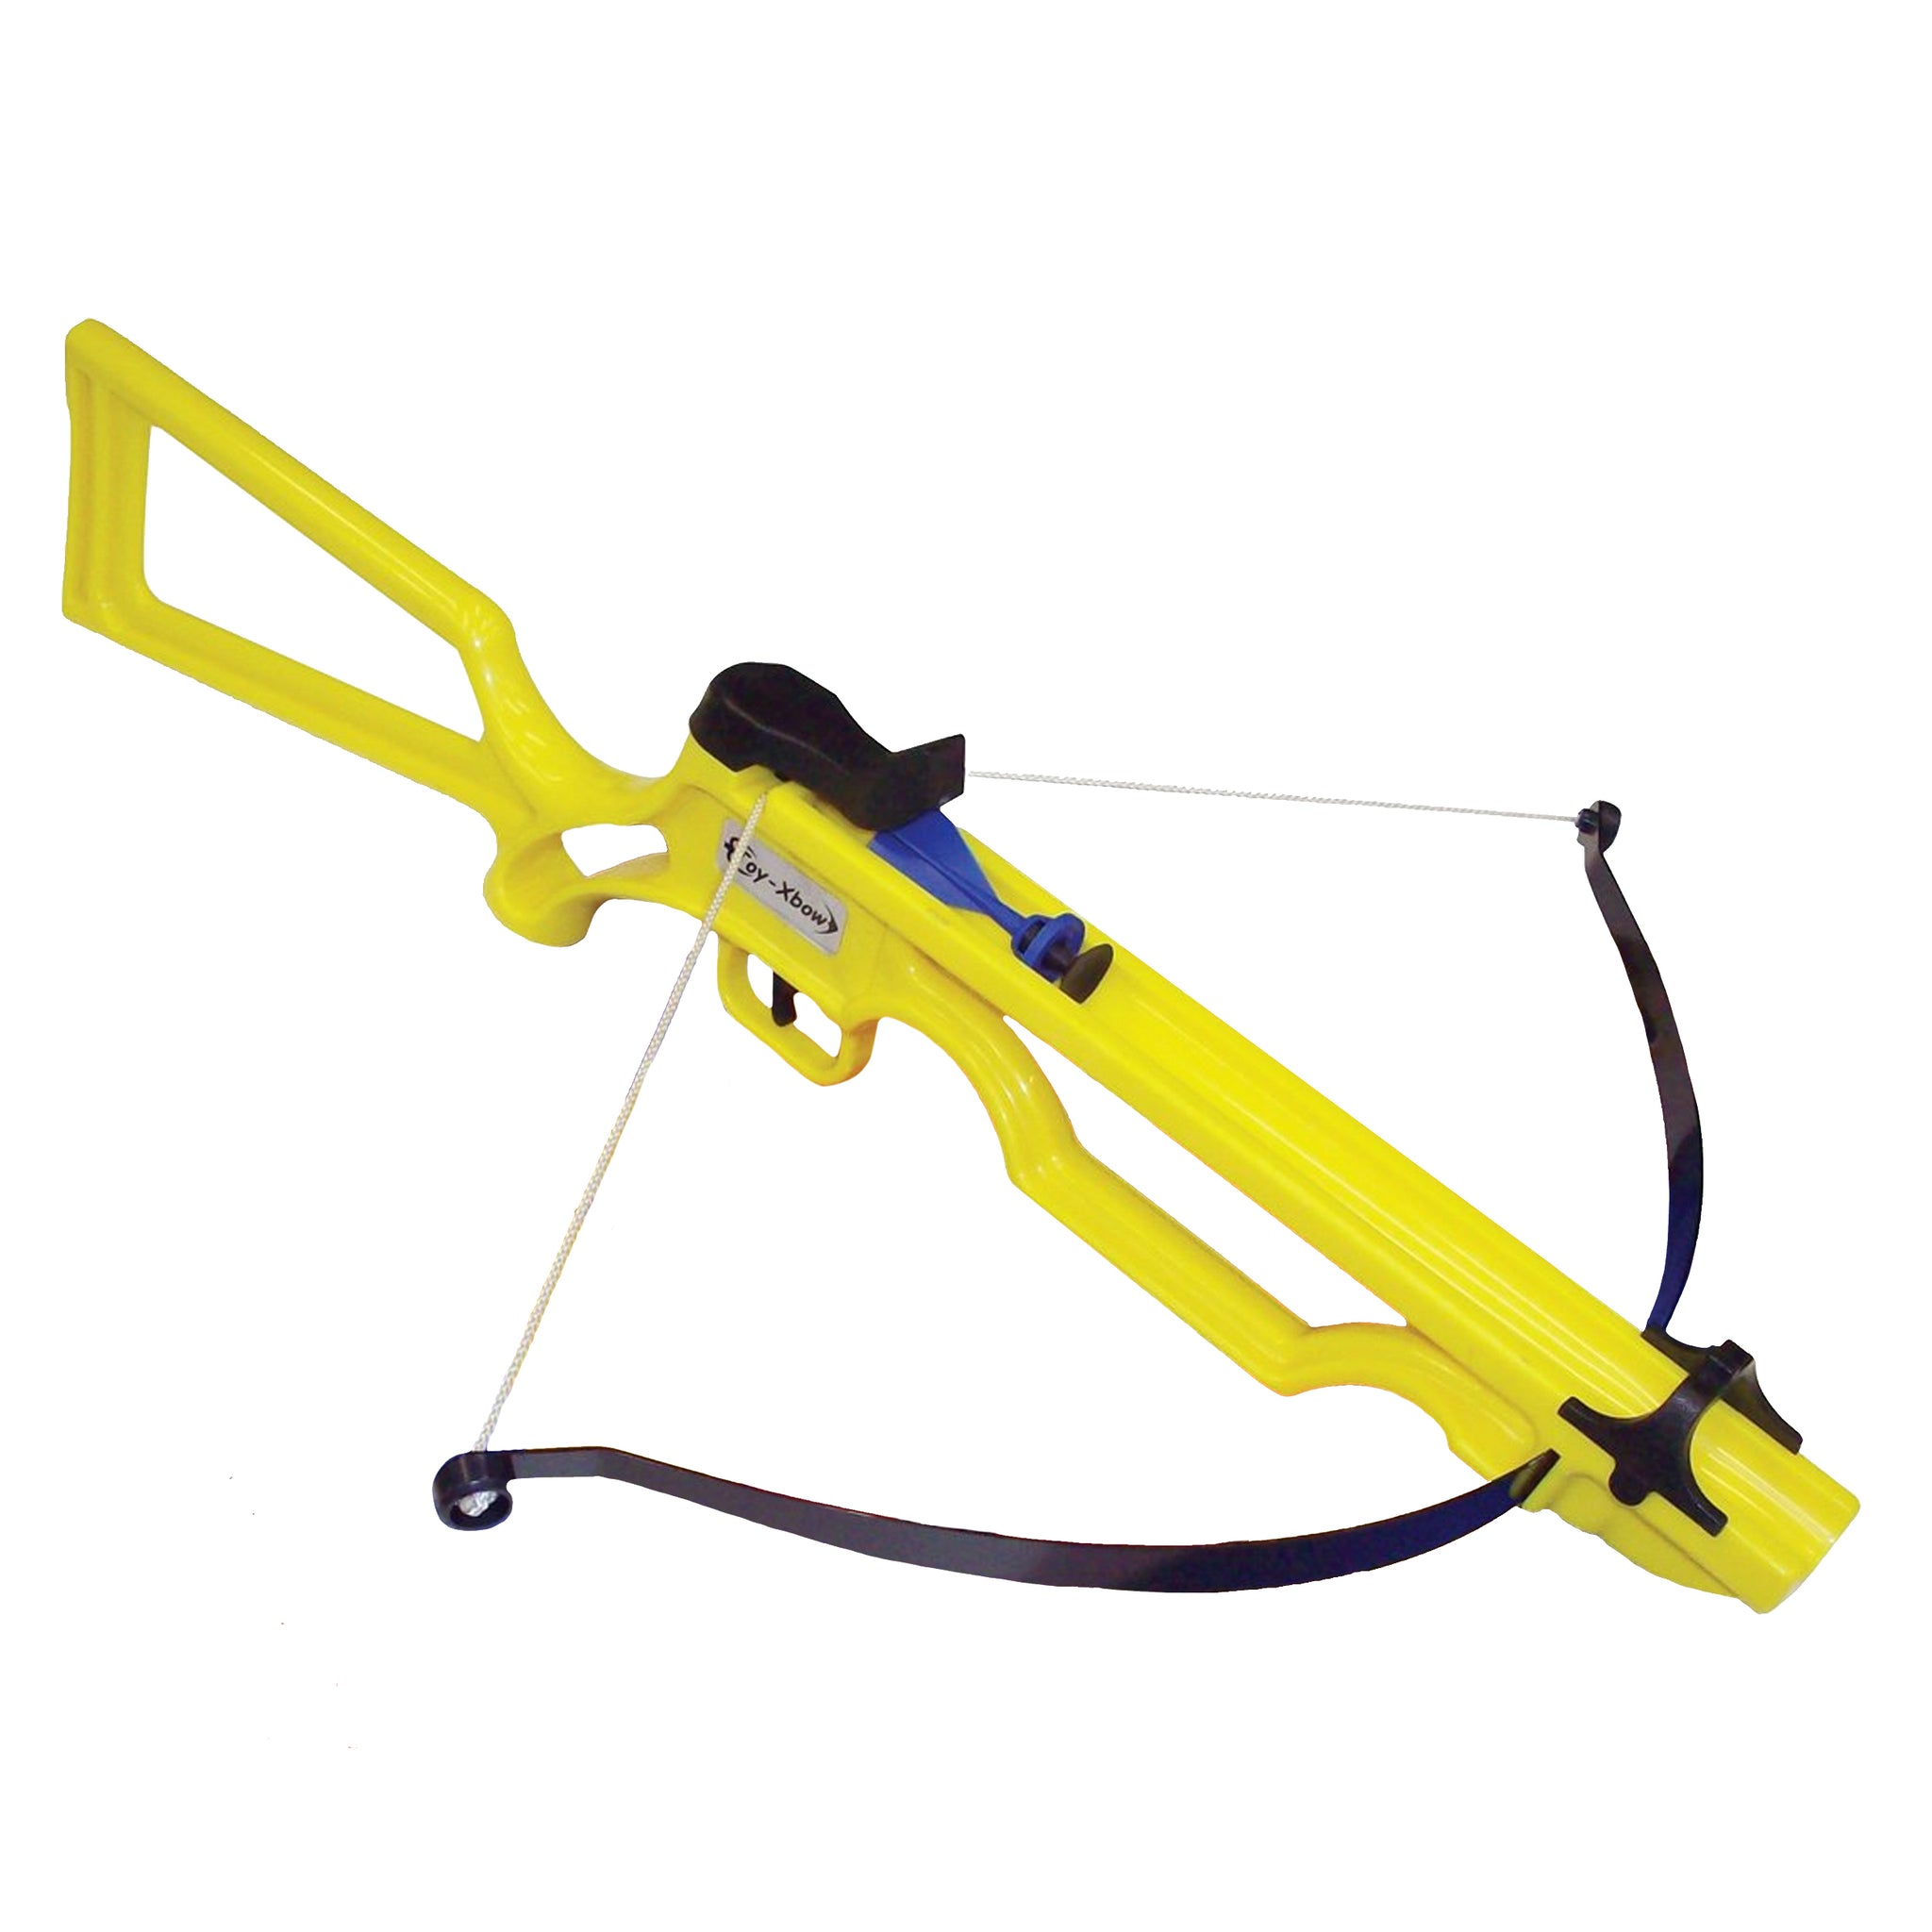 SA Sports Sniper Toy Crossbow 568